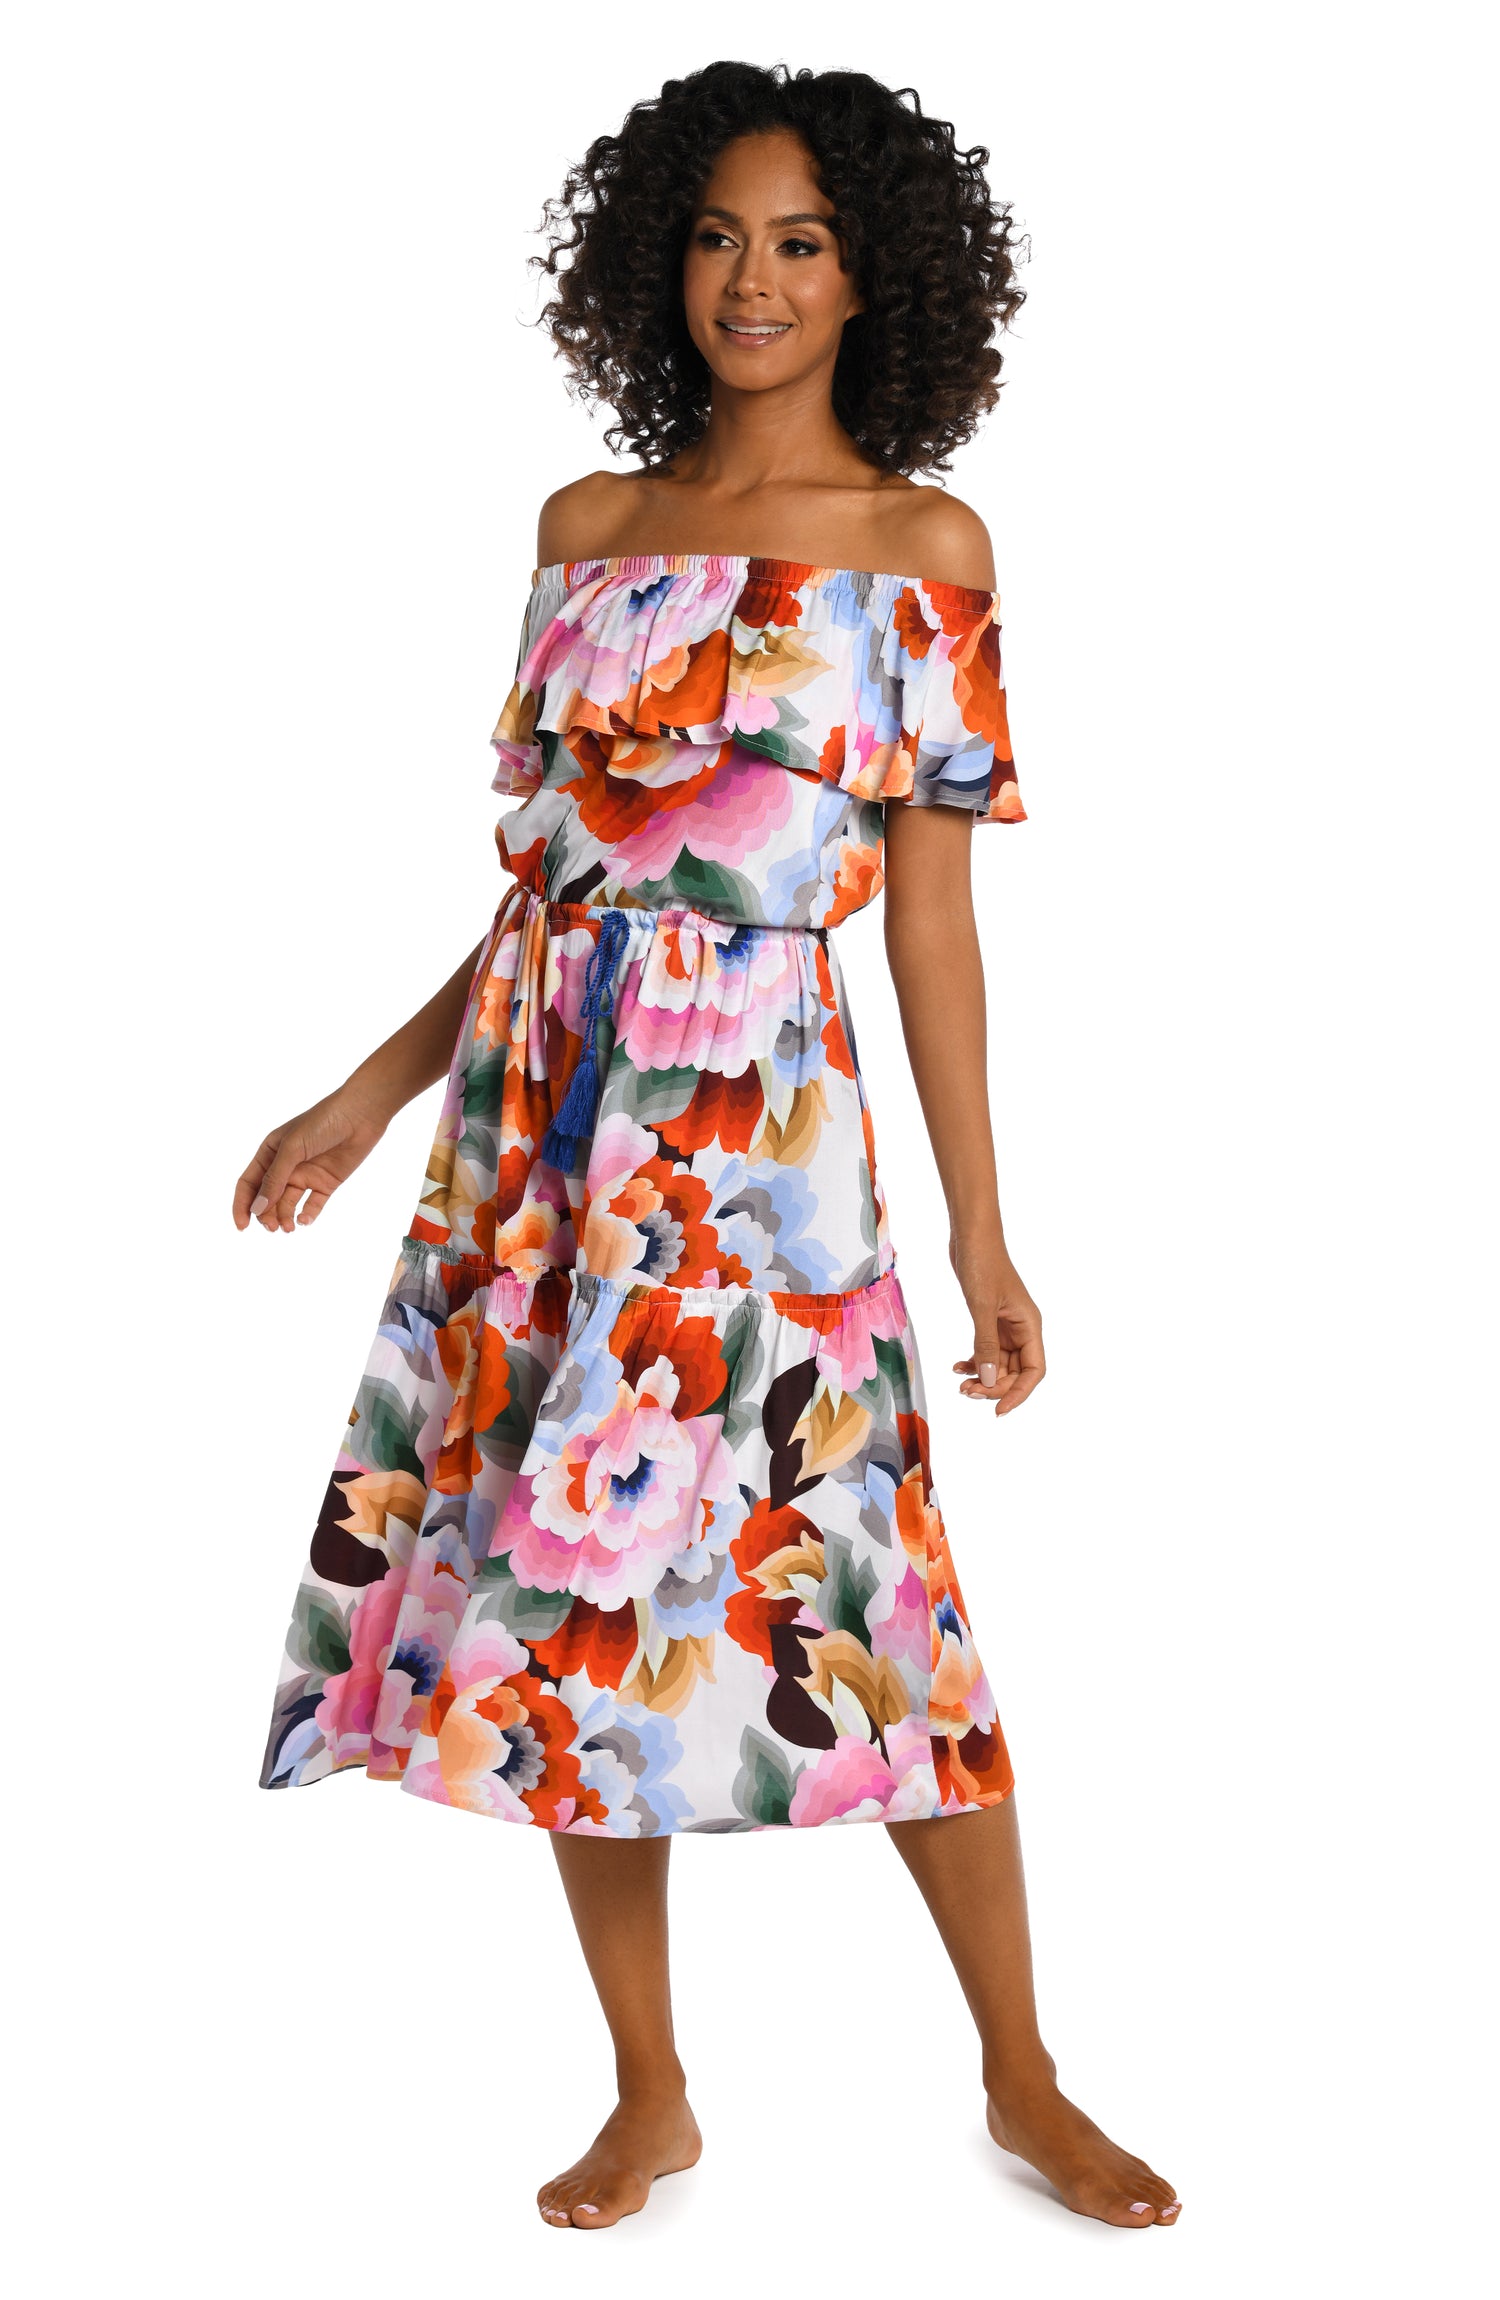 Model is wearing a multi colored floral printed off shoulder cover up dress from our Floral Rhythm collection!